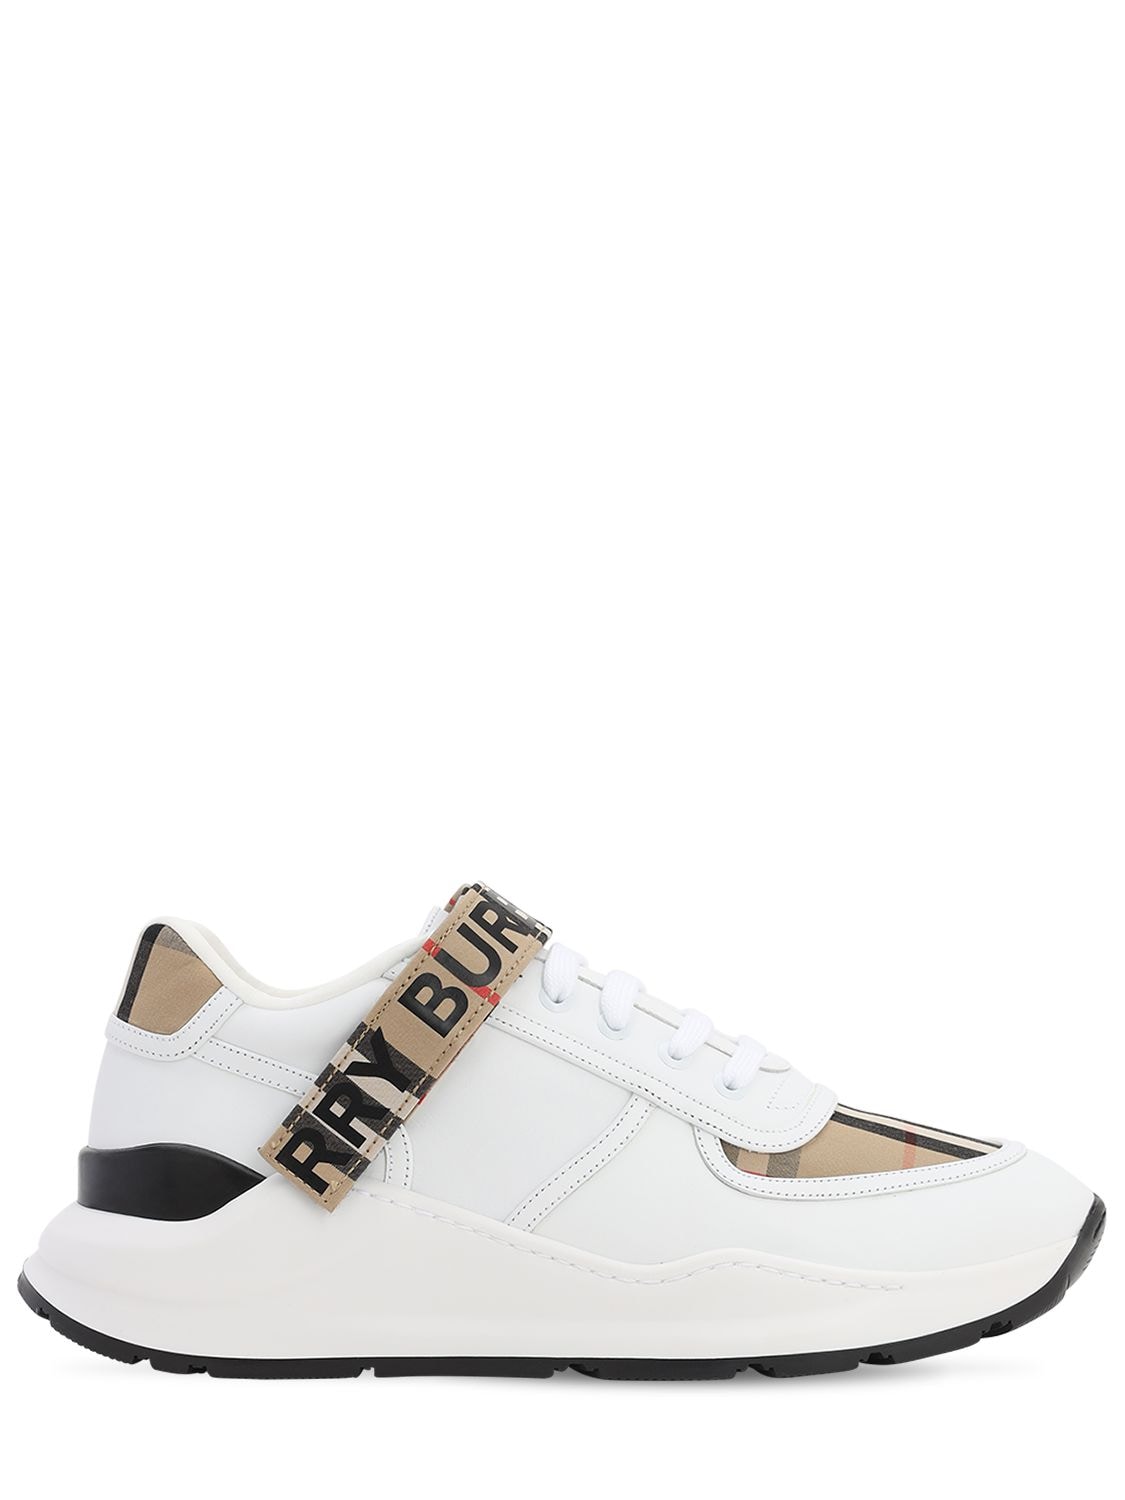 BURBERRY RONNIE CHECK LEATHER LOW-TOP trainers,71IBQH006-QTCWMJY1